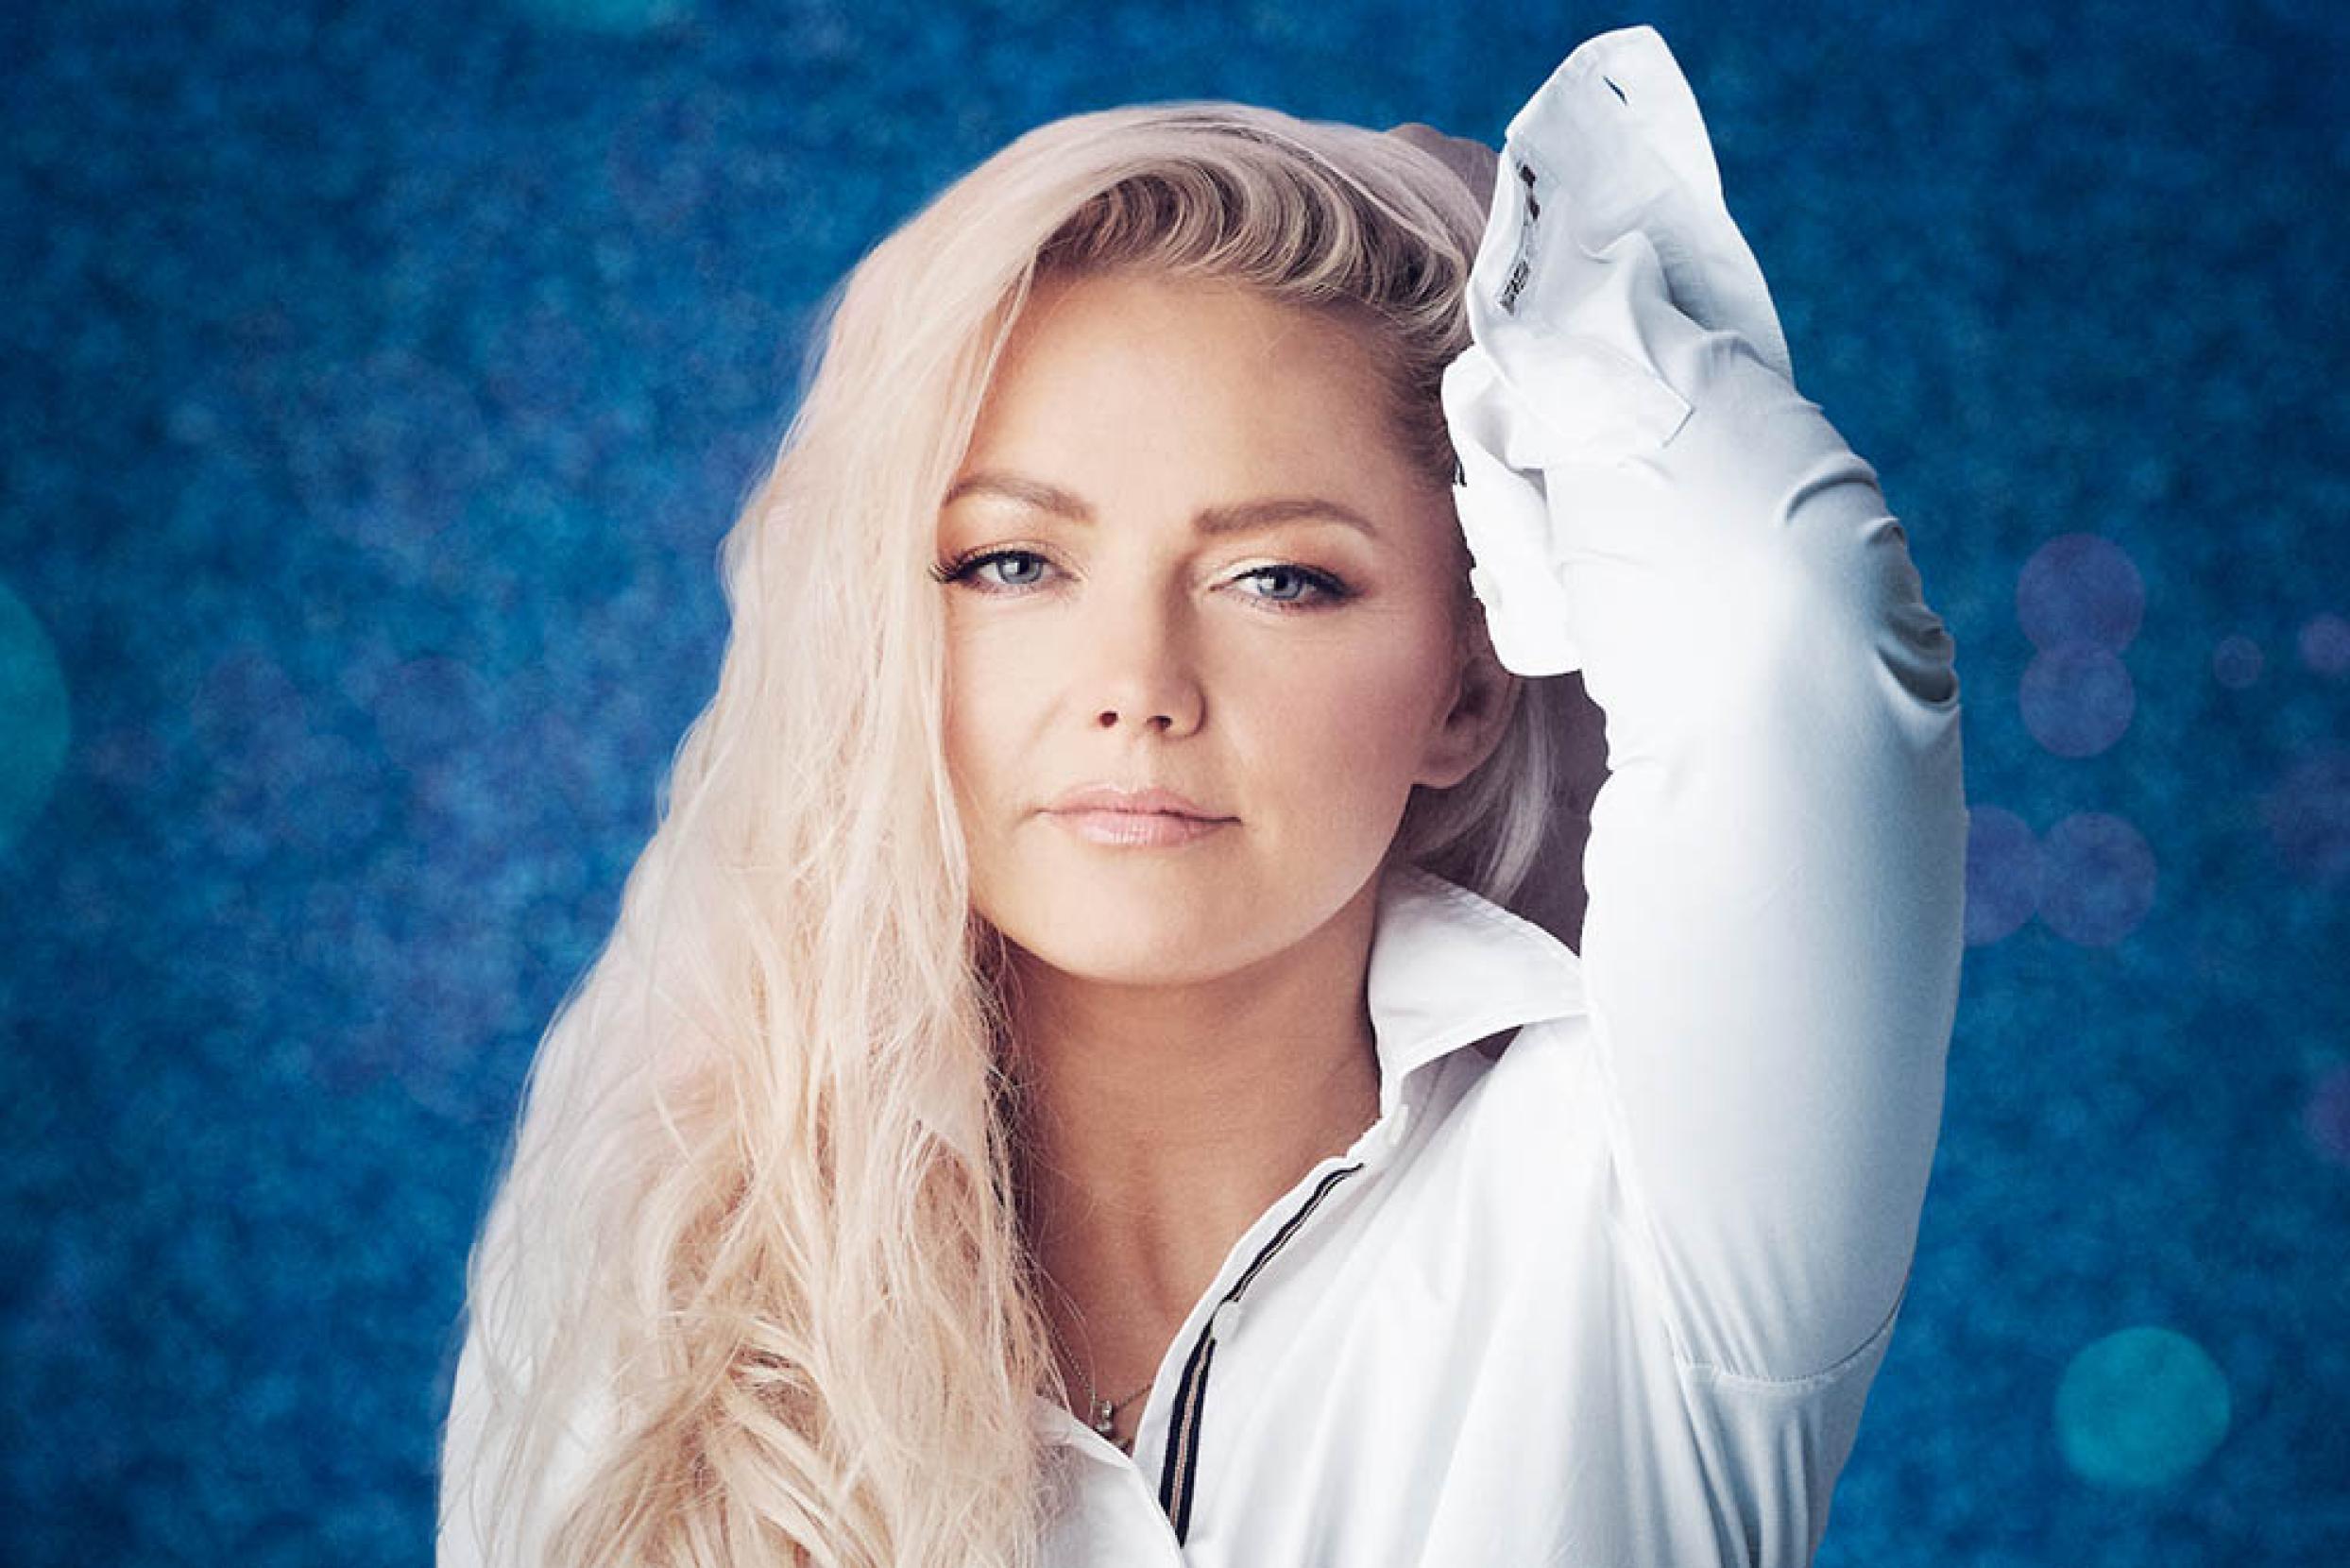 Actress and singer Hannah Spearritt is the third celebrity confirmed for Dancing on Ice